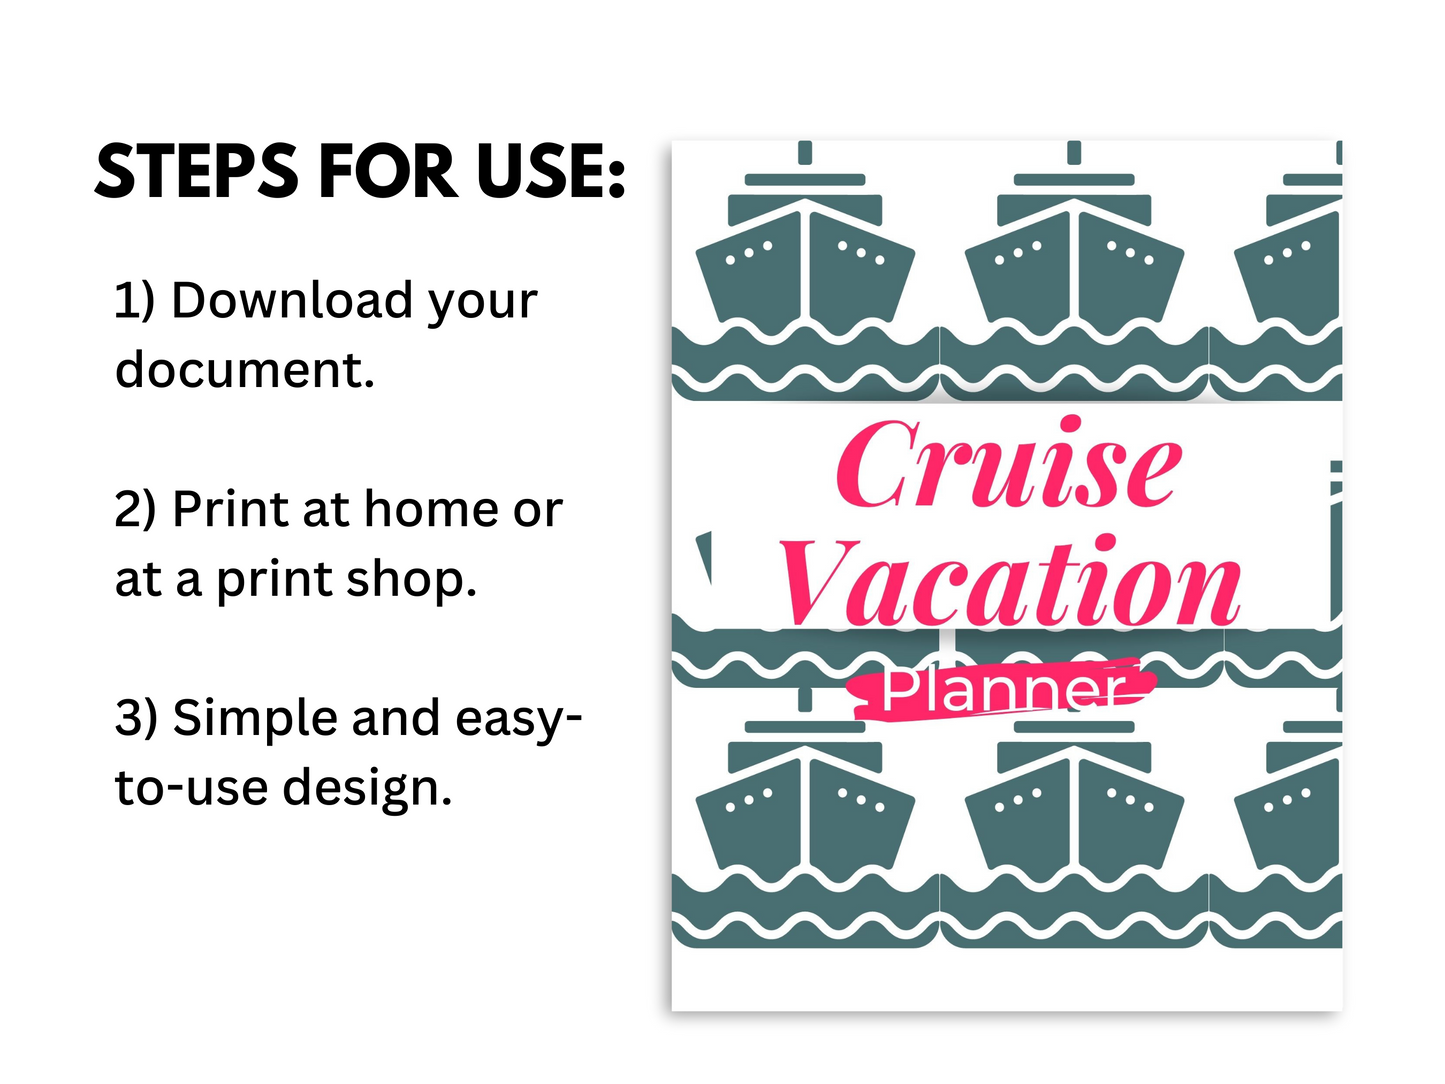 Steps on how to use the planner with a green and pink cover that has cruise ships on it.